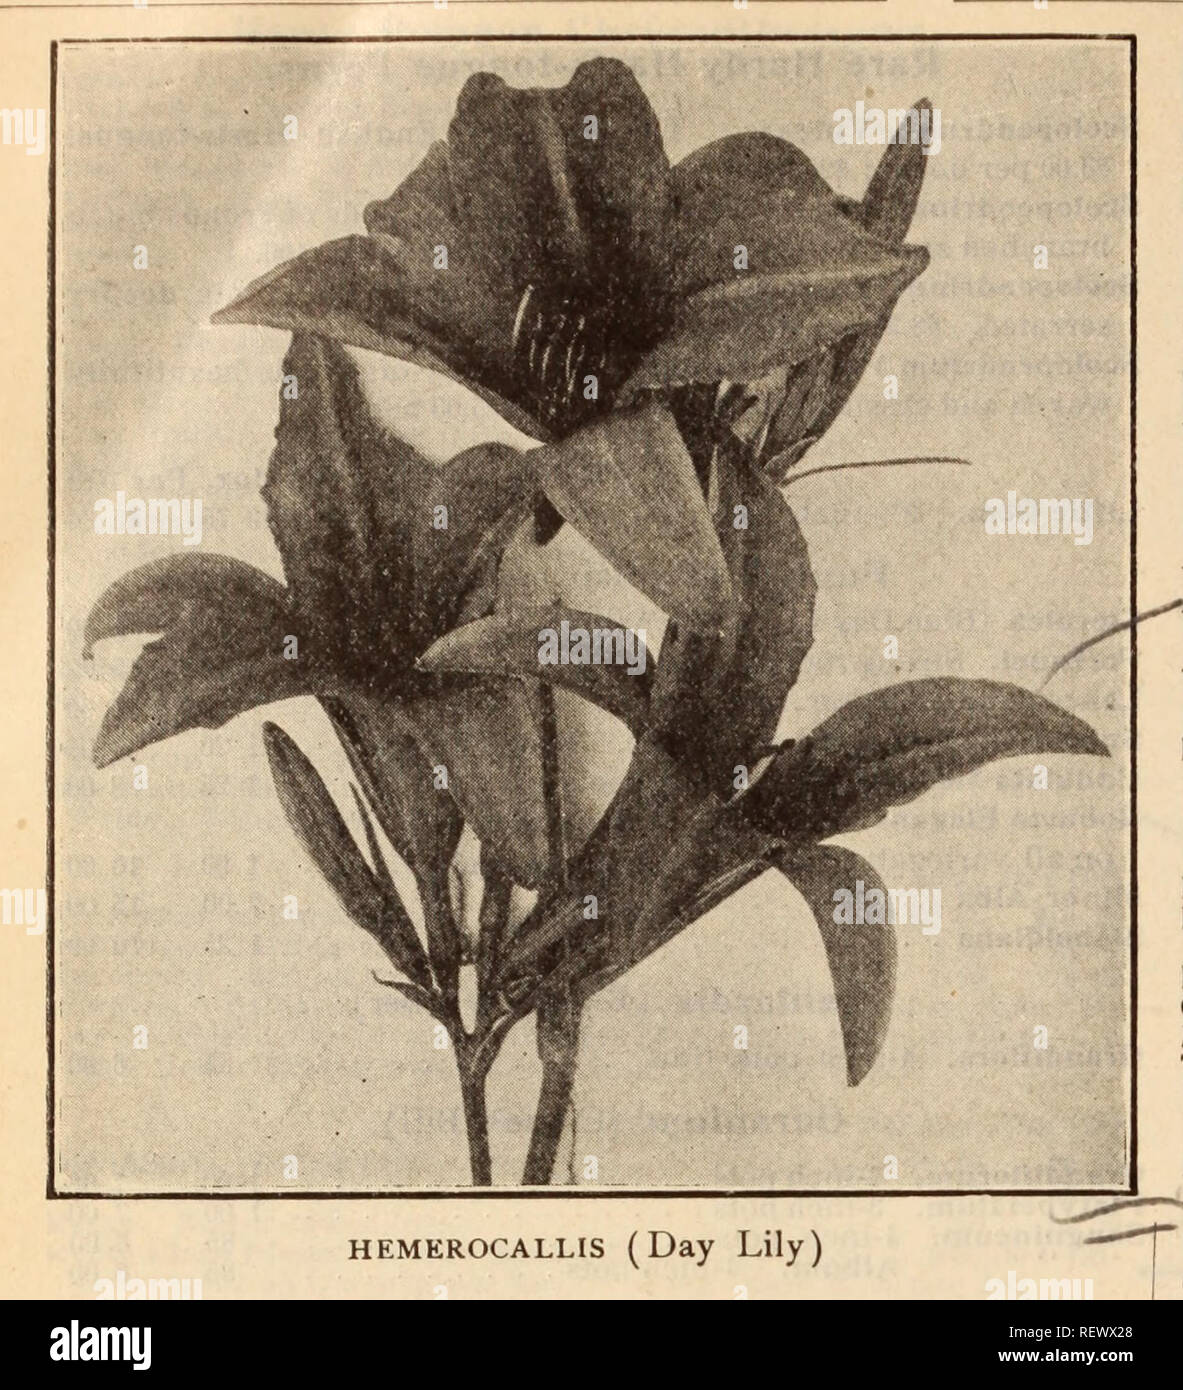 . Dreer's wholesale price list / Henry A. Dreer.. Nursery Catalogue. 28 HENRY A. DREER, PHILADELPHIA, PA., WHOLESALE PRICE LIST. HEMEROCALLIS (Day Lily) ORNAMENTAL GRASSES AND BAMBOOS. Per doz. Per 100 Arundo Donax. Strong, dormant eyes $1 50 $10 00 Donax Varlegata. Strong, dormant eyes 2 00 15 00 Arrhenatherum Bulbosum folia Variegata 1 50 10 00 Elymus Glaucus (Blue Lyme Grass) 1 50 10 00 Erianthus Ravennae. Strong according to size $6.00, $8.00 and 10 00 Eulalia Japonica Variegata 6.00, 8.00 and 10 00 Japonlca Zebrlna 6.00, 8.00 and 10 00 Gracilllma Univittata 6.00, 8.00 and 10 00 Festuca QI Stock Photo